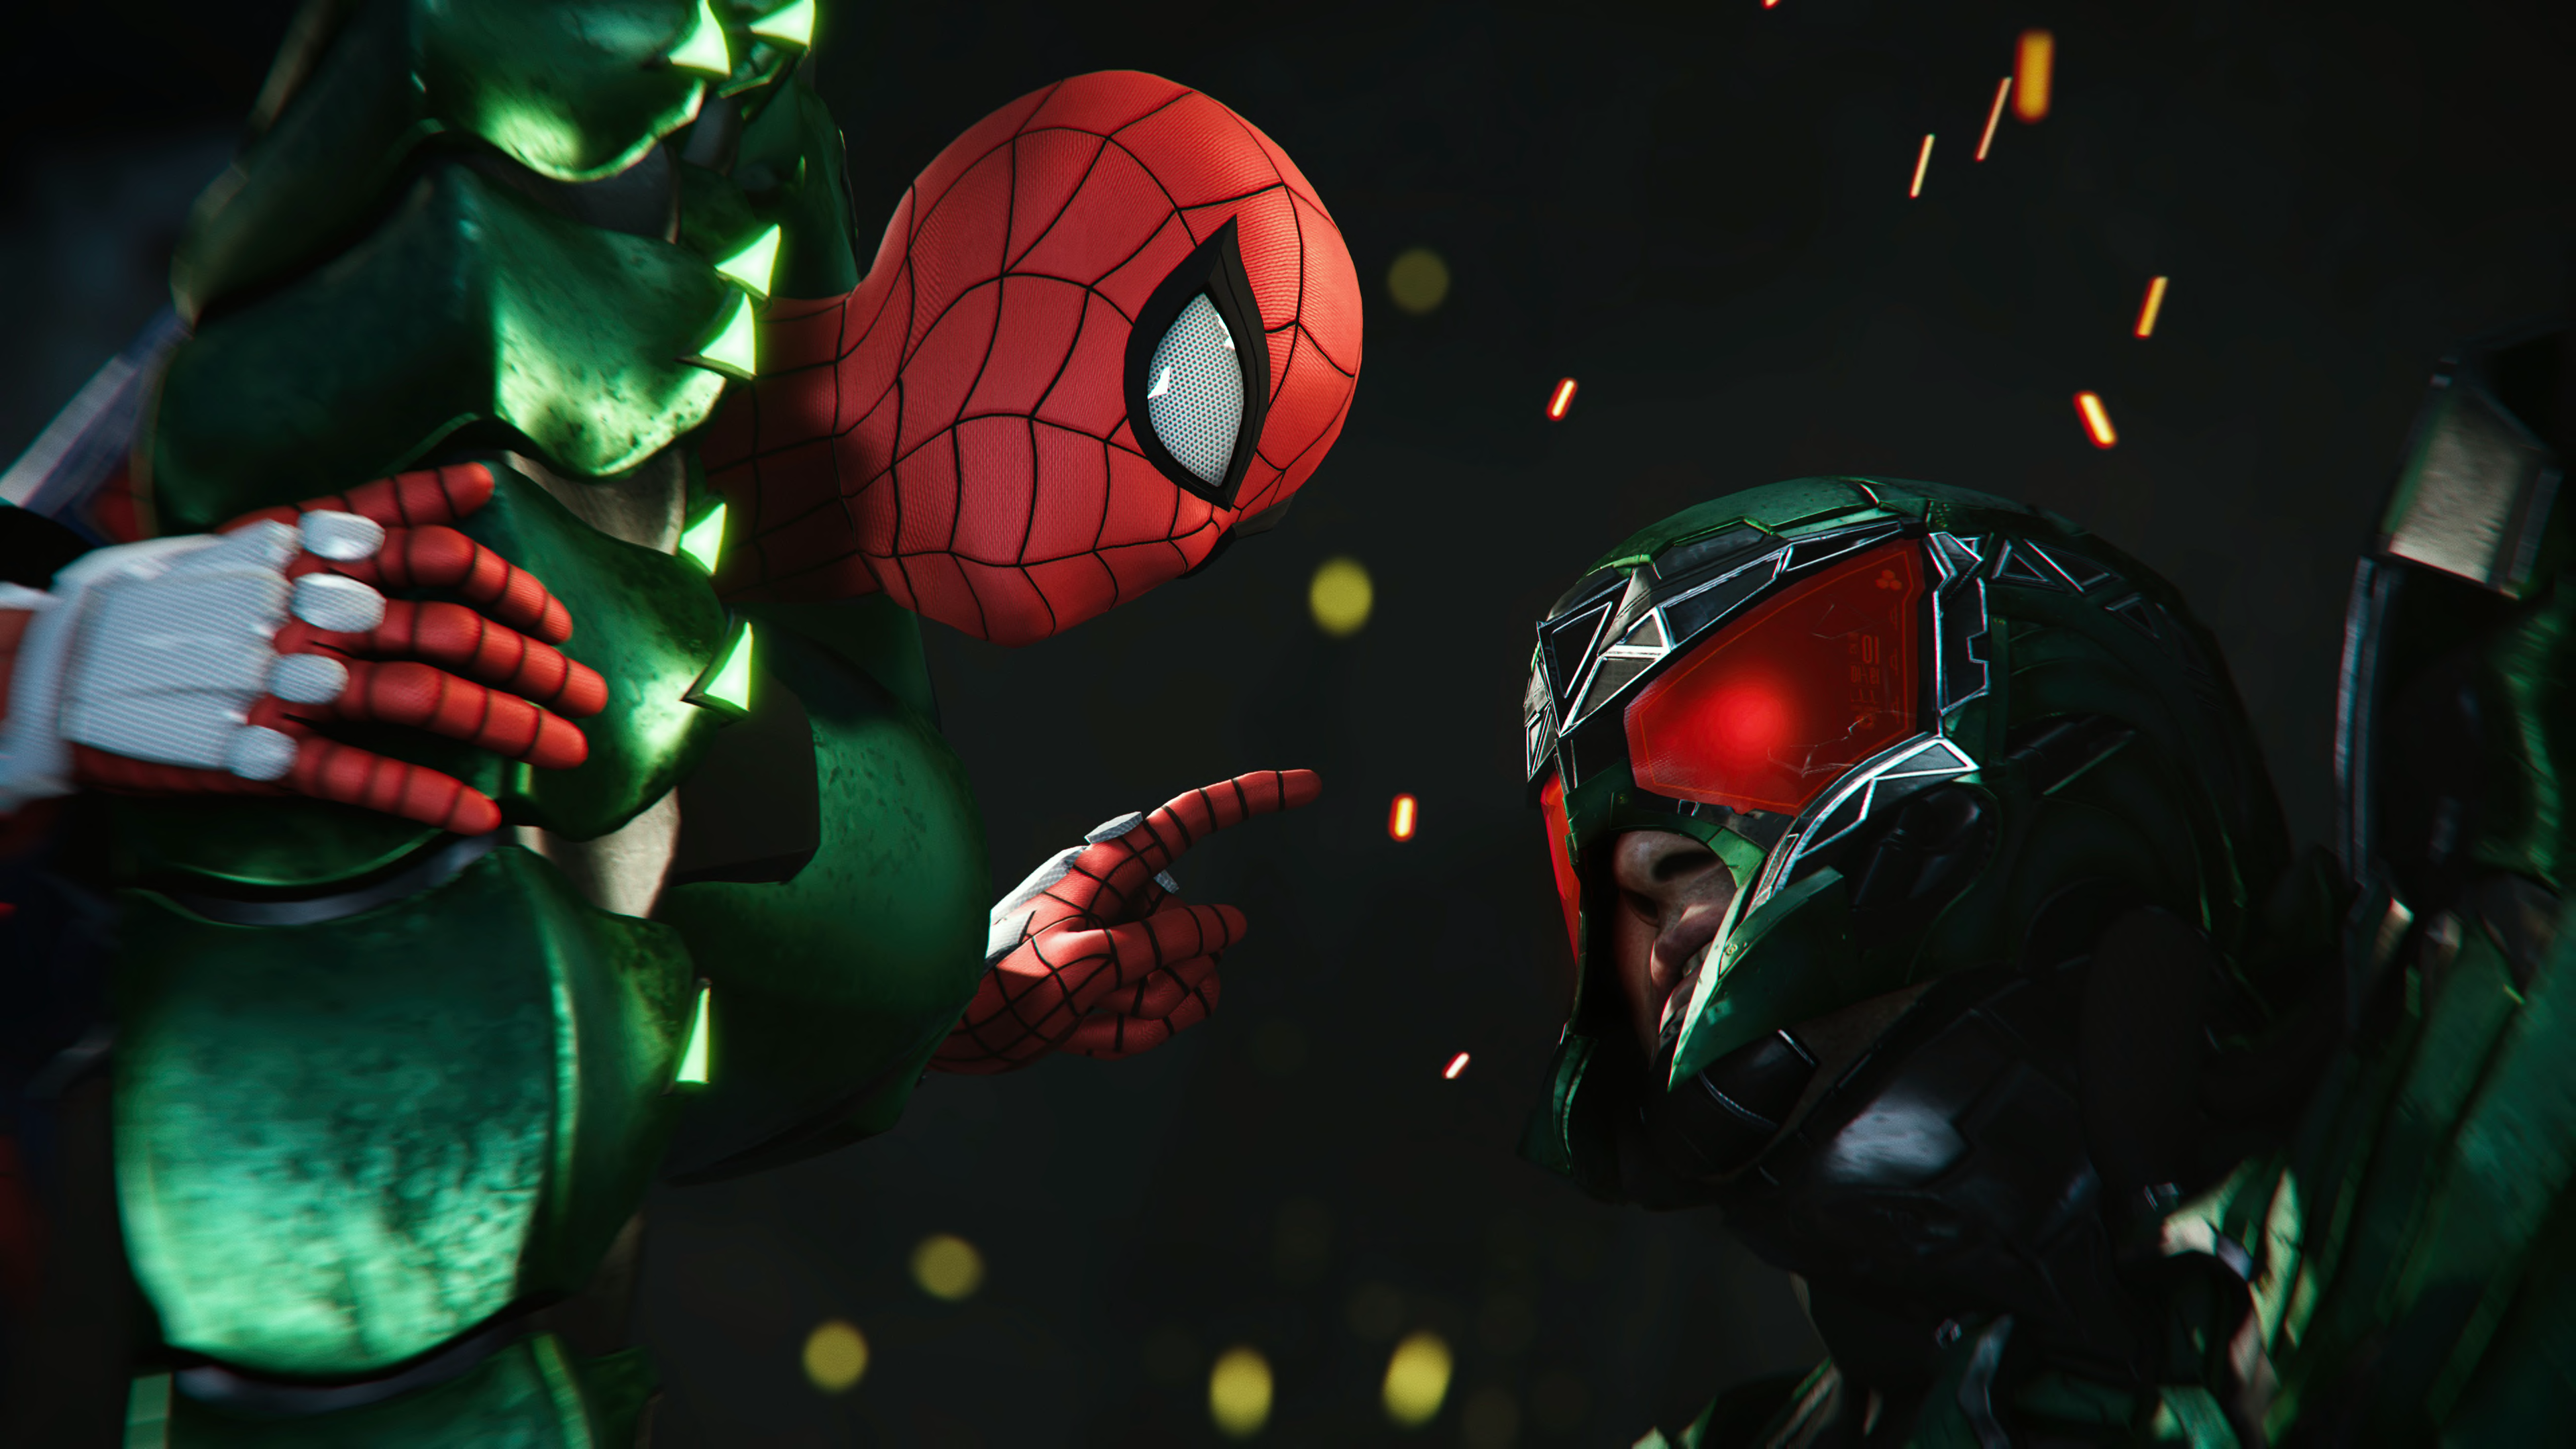 Marvel's Spider-Man 2 lets players instantly switch between Peter and Miles